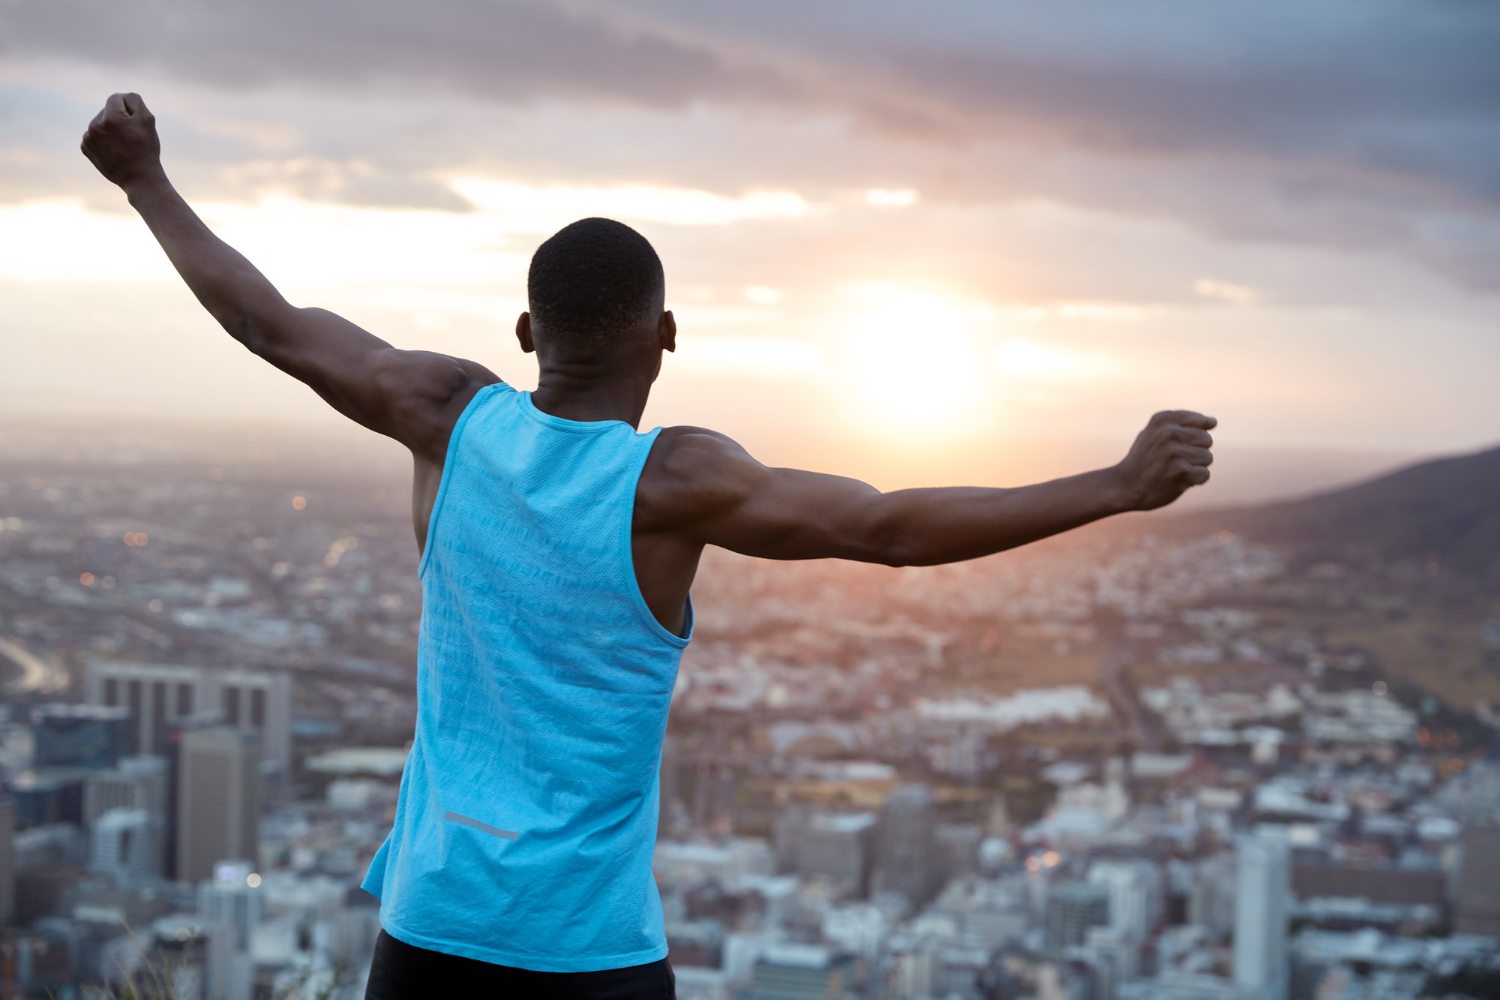 carefree-independent-man-with-dark-skin-stands-back-stretches-hands-as-holding-world-feels-freedom-wears-blue-casual-vest-enjoys-panoramic-view-with-sunrise-recreation-concept-1